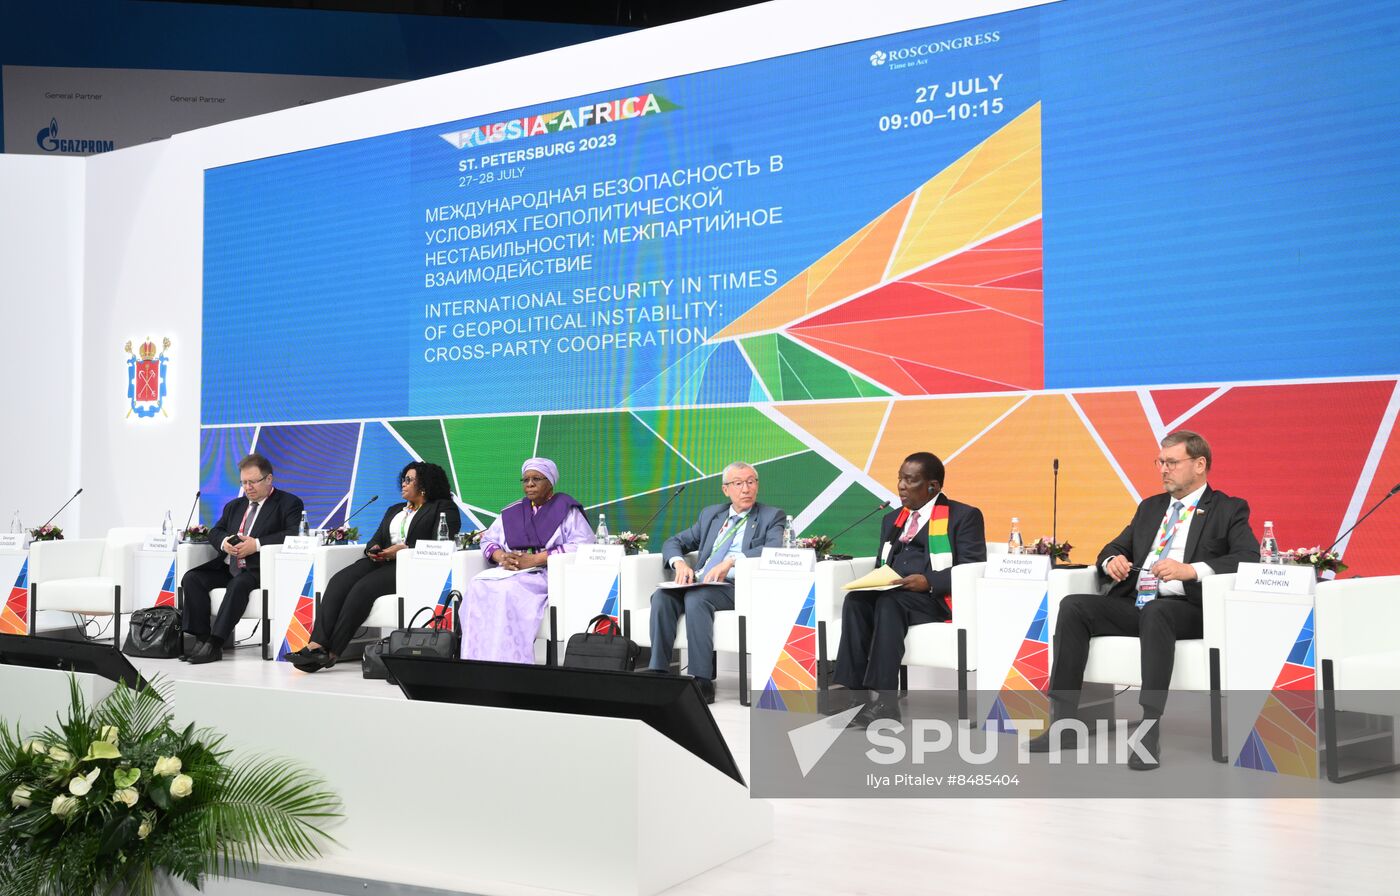 2nd Russia-Africa Summit. International Security in Times of Geopolitical Instability: Cross-Party Cooperation